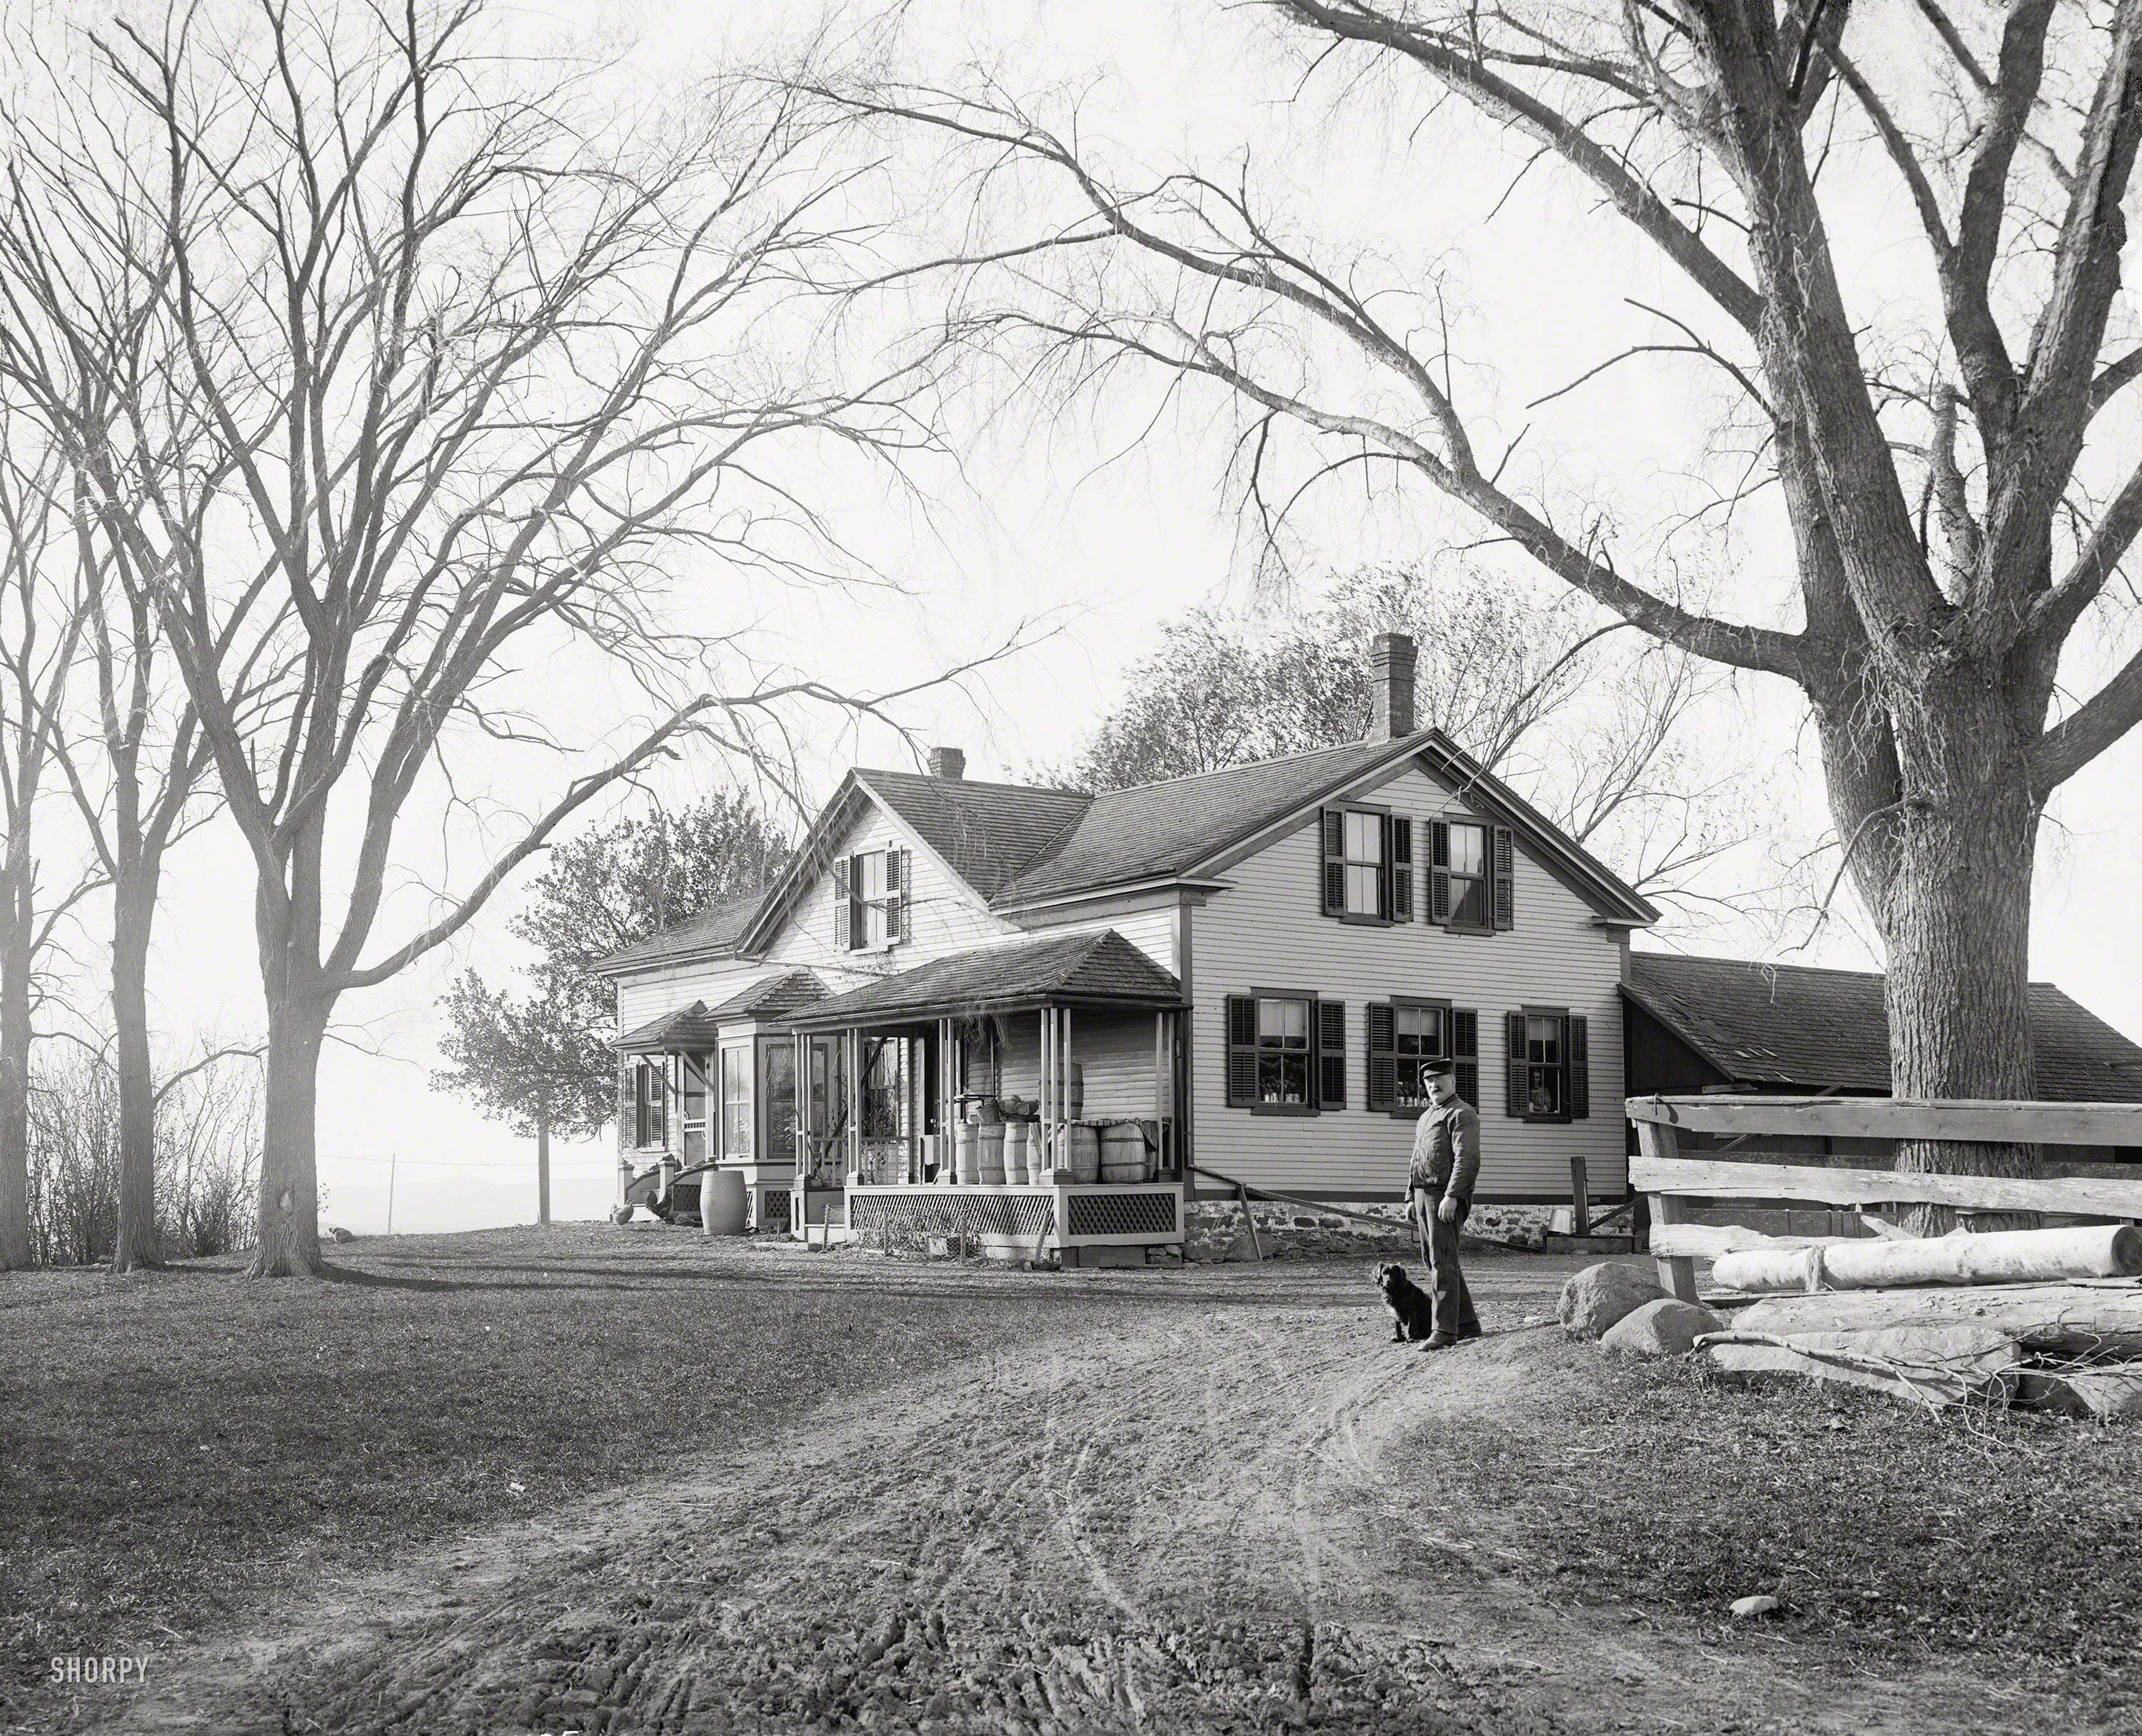 Circa 1904. "The Churchill house." No location given, but neighboring images in this sequence were taken in Vermont. 8x10 inch glass negative. View full size.